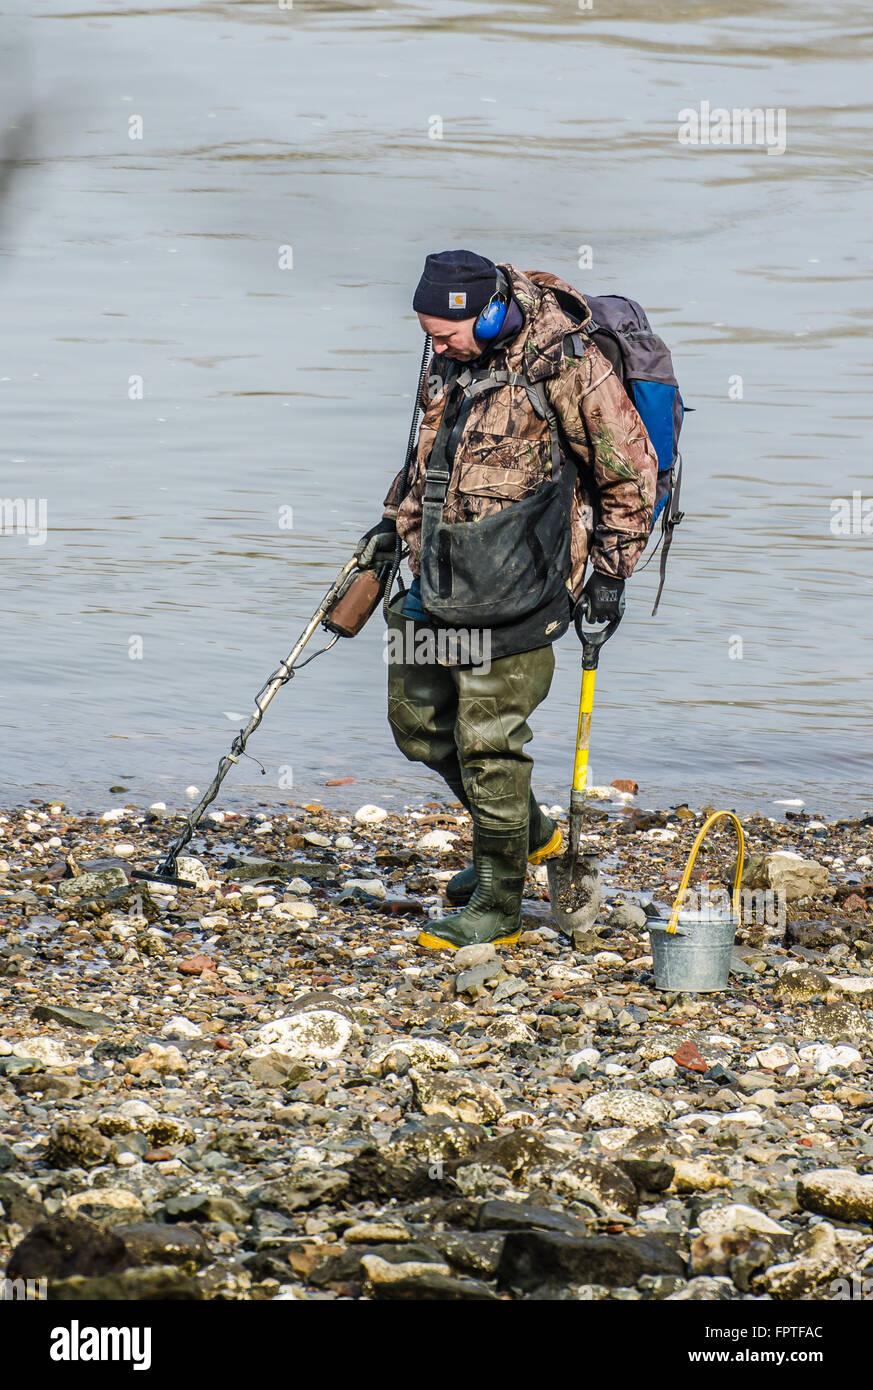 Licensed 'Mudlark' using a metal detector to find valuable or historical items along the Thames riverbank at Battersea, London. Space for copy Stock Photo